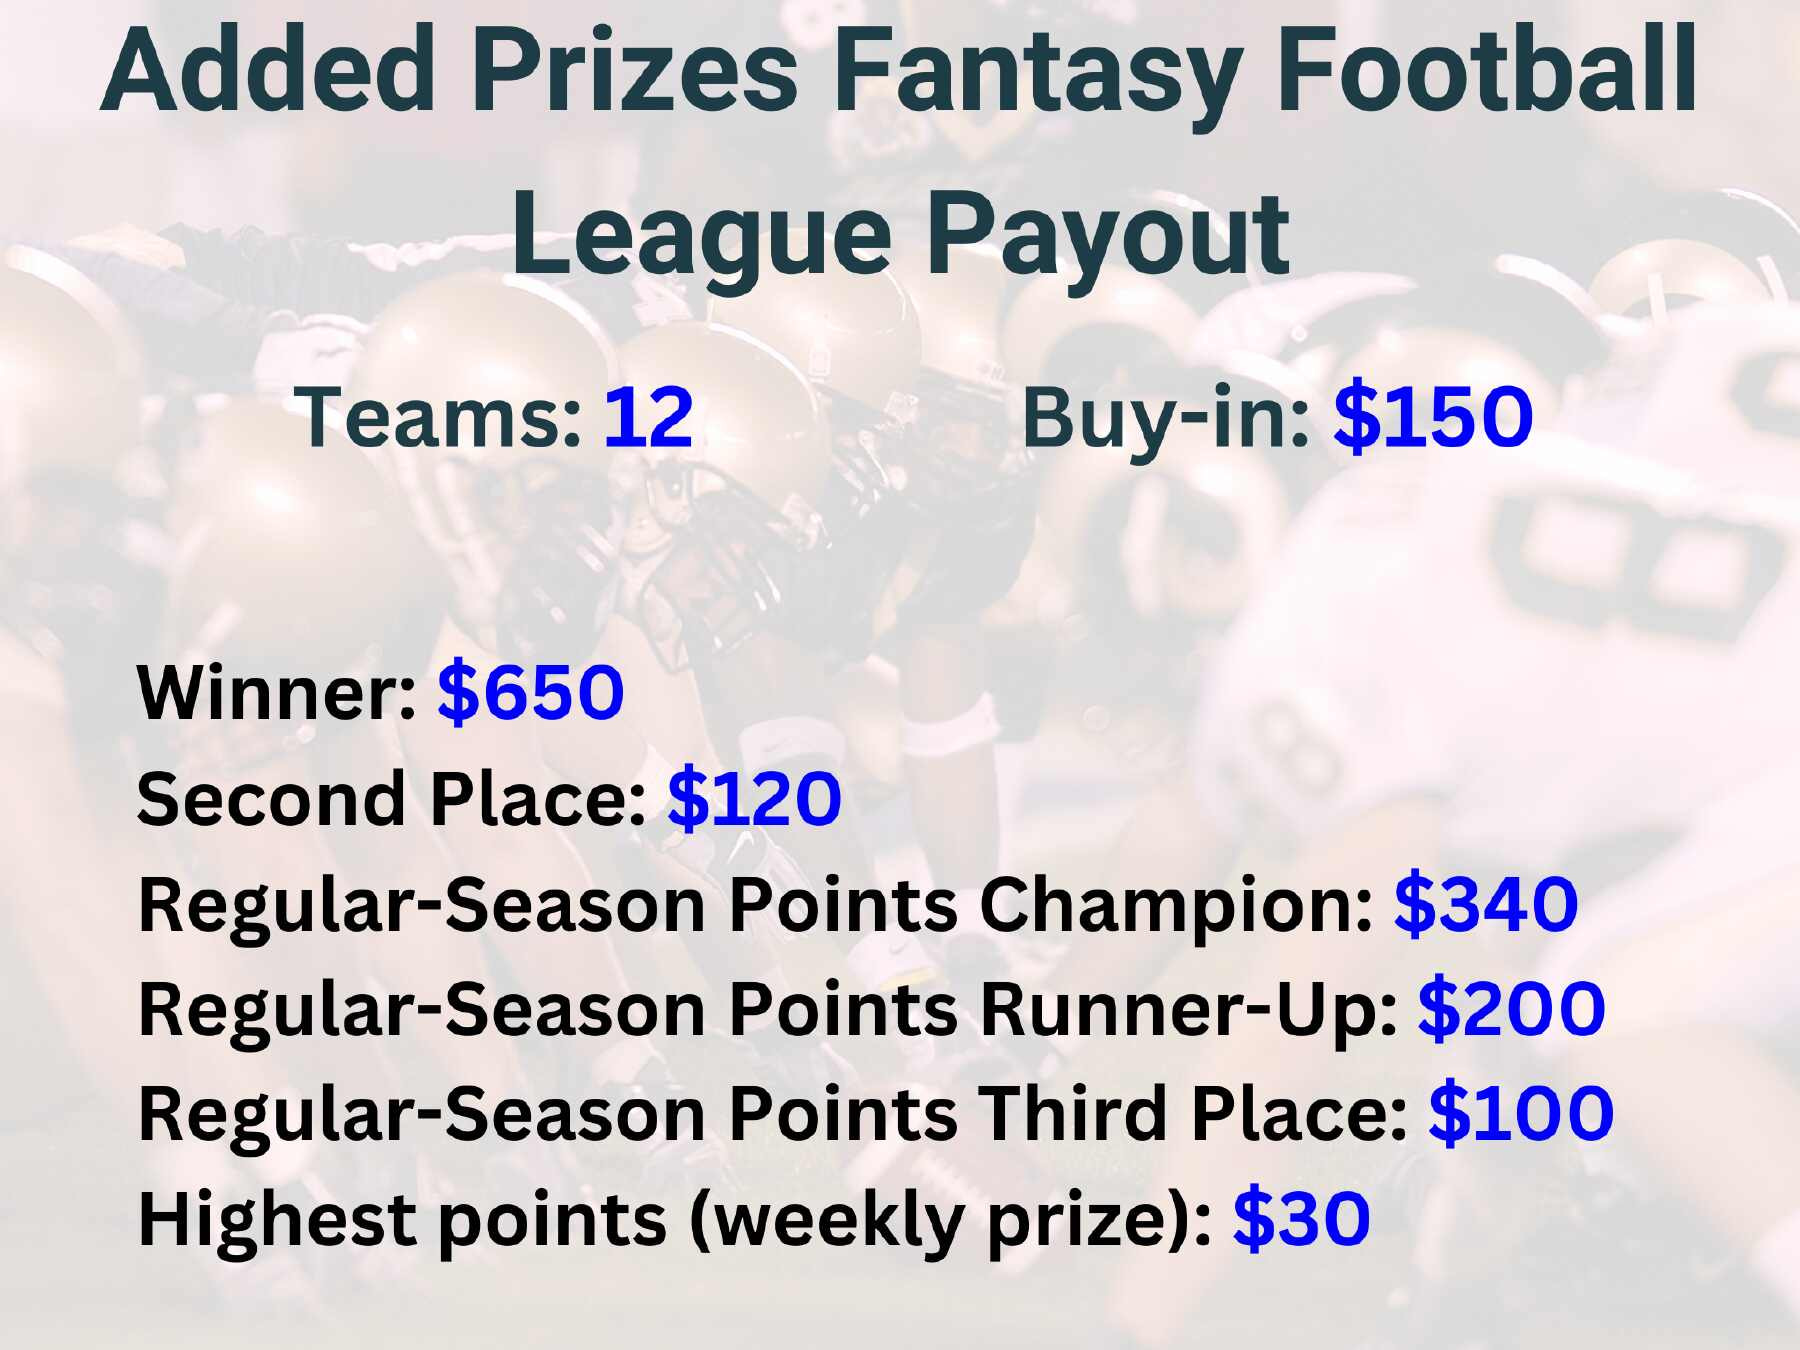 Added prizes fantasy football payout structure